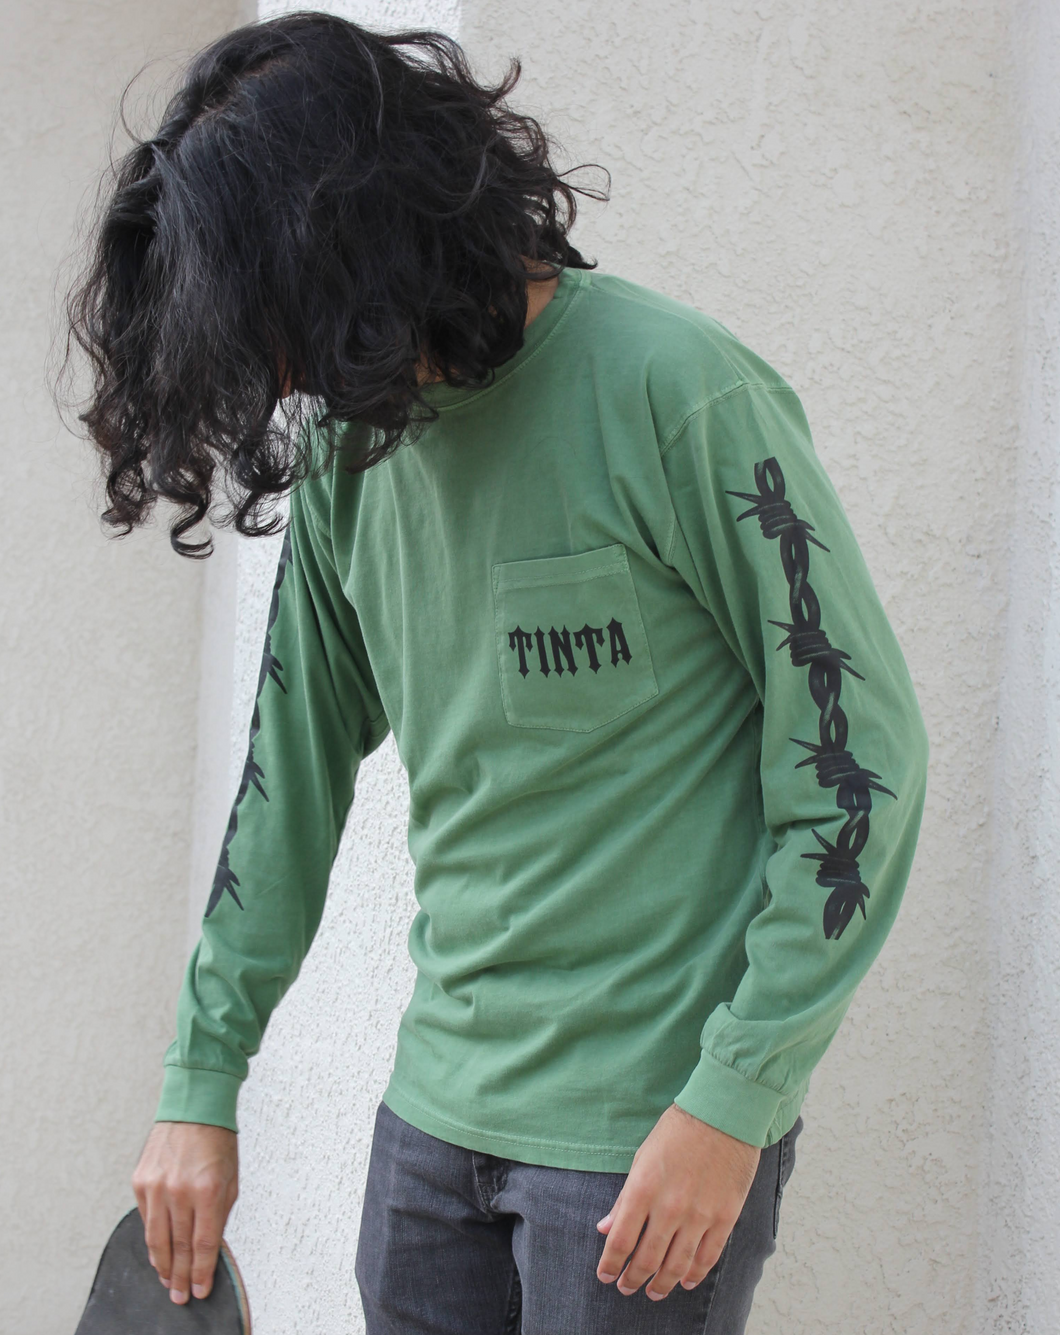 green long sleeve shirt with barbed wire on sleeves and the word 